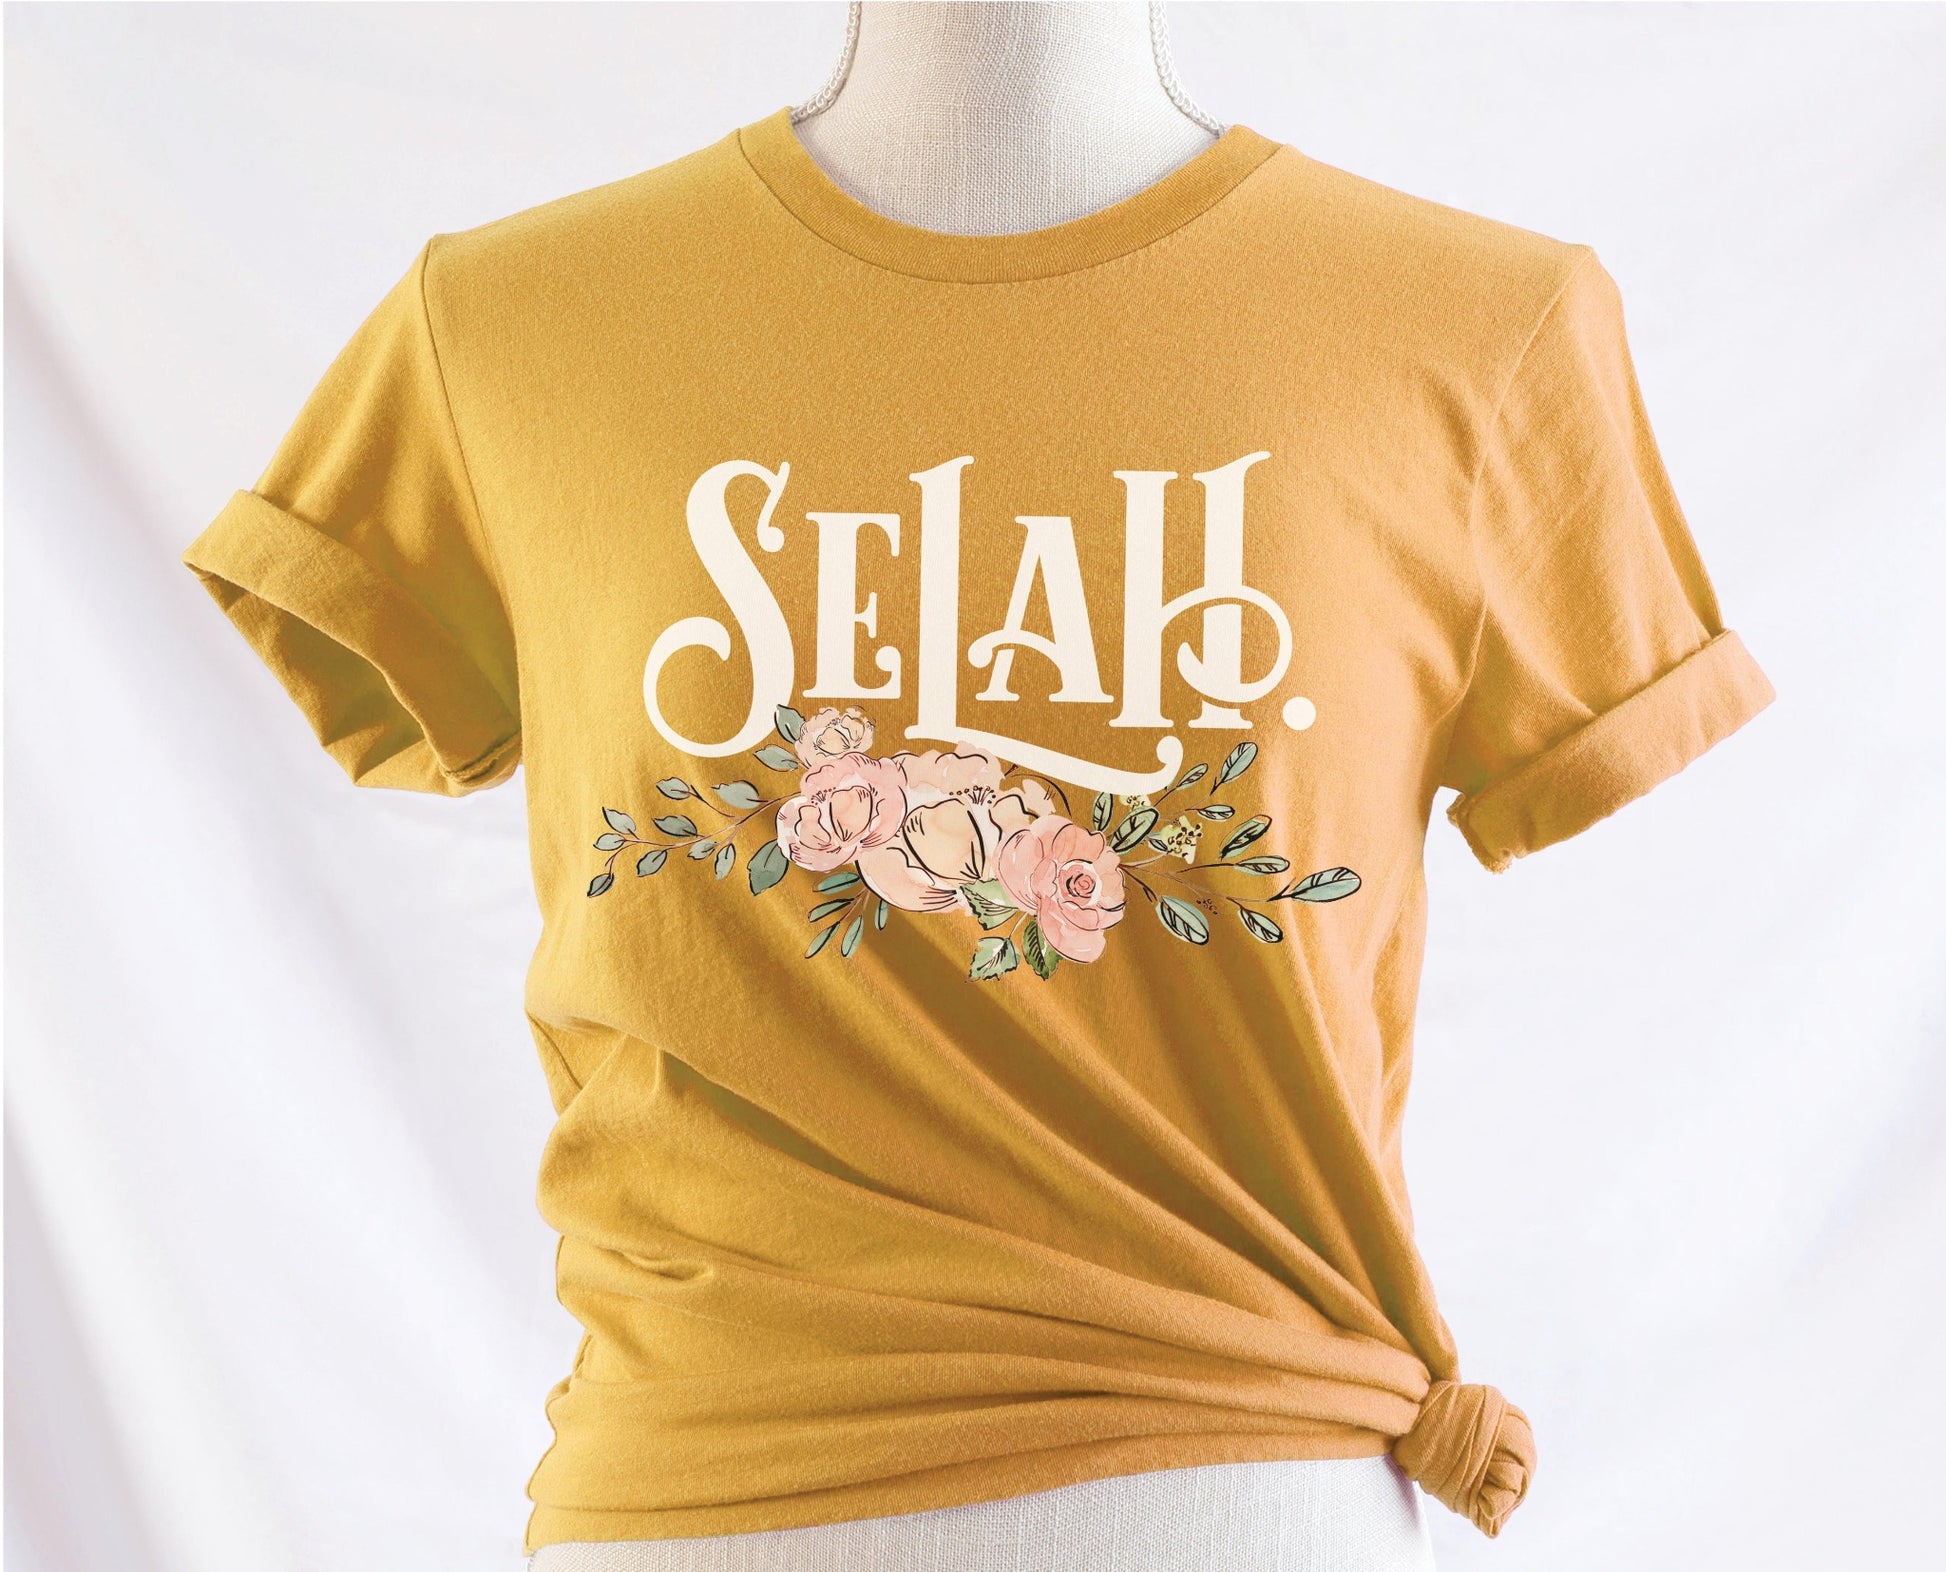 Selah Psalm bible verse watercolor floral Christian aesthetic design printed in white peach blush pink on soft mustard yellow t-shirt for women